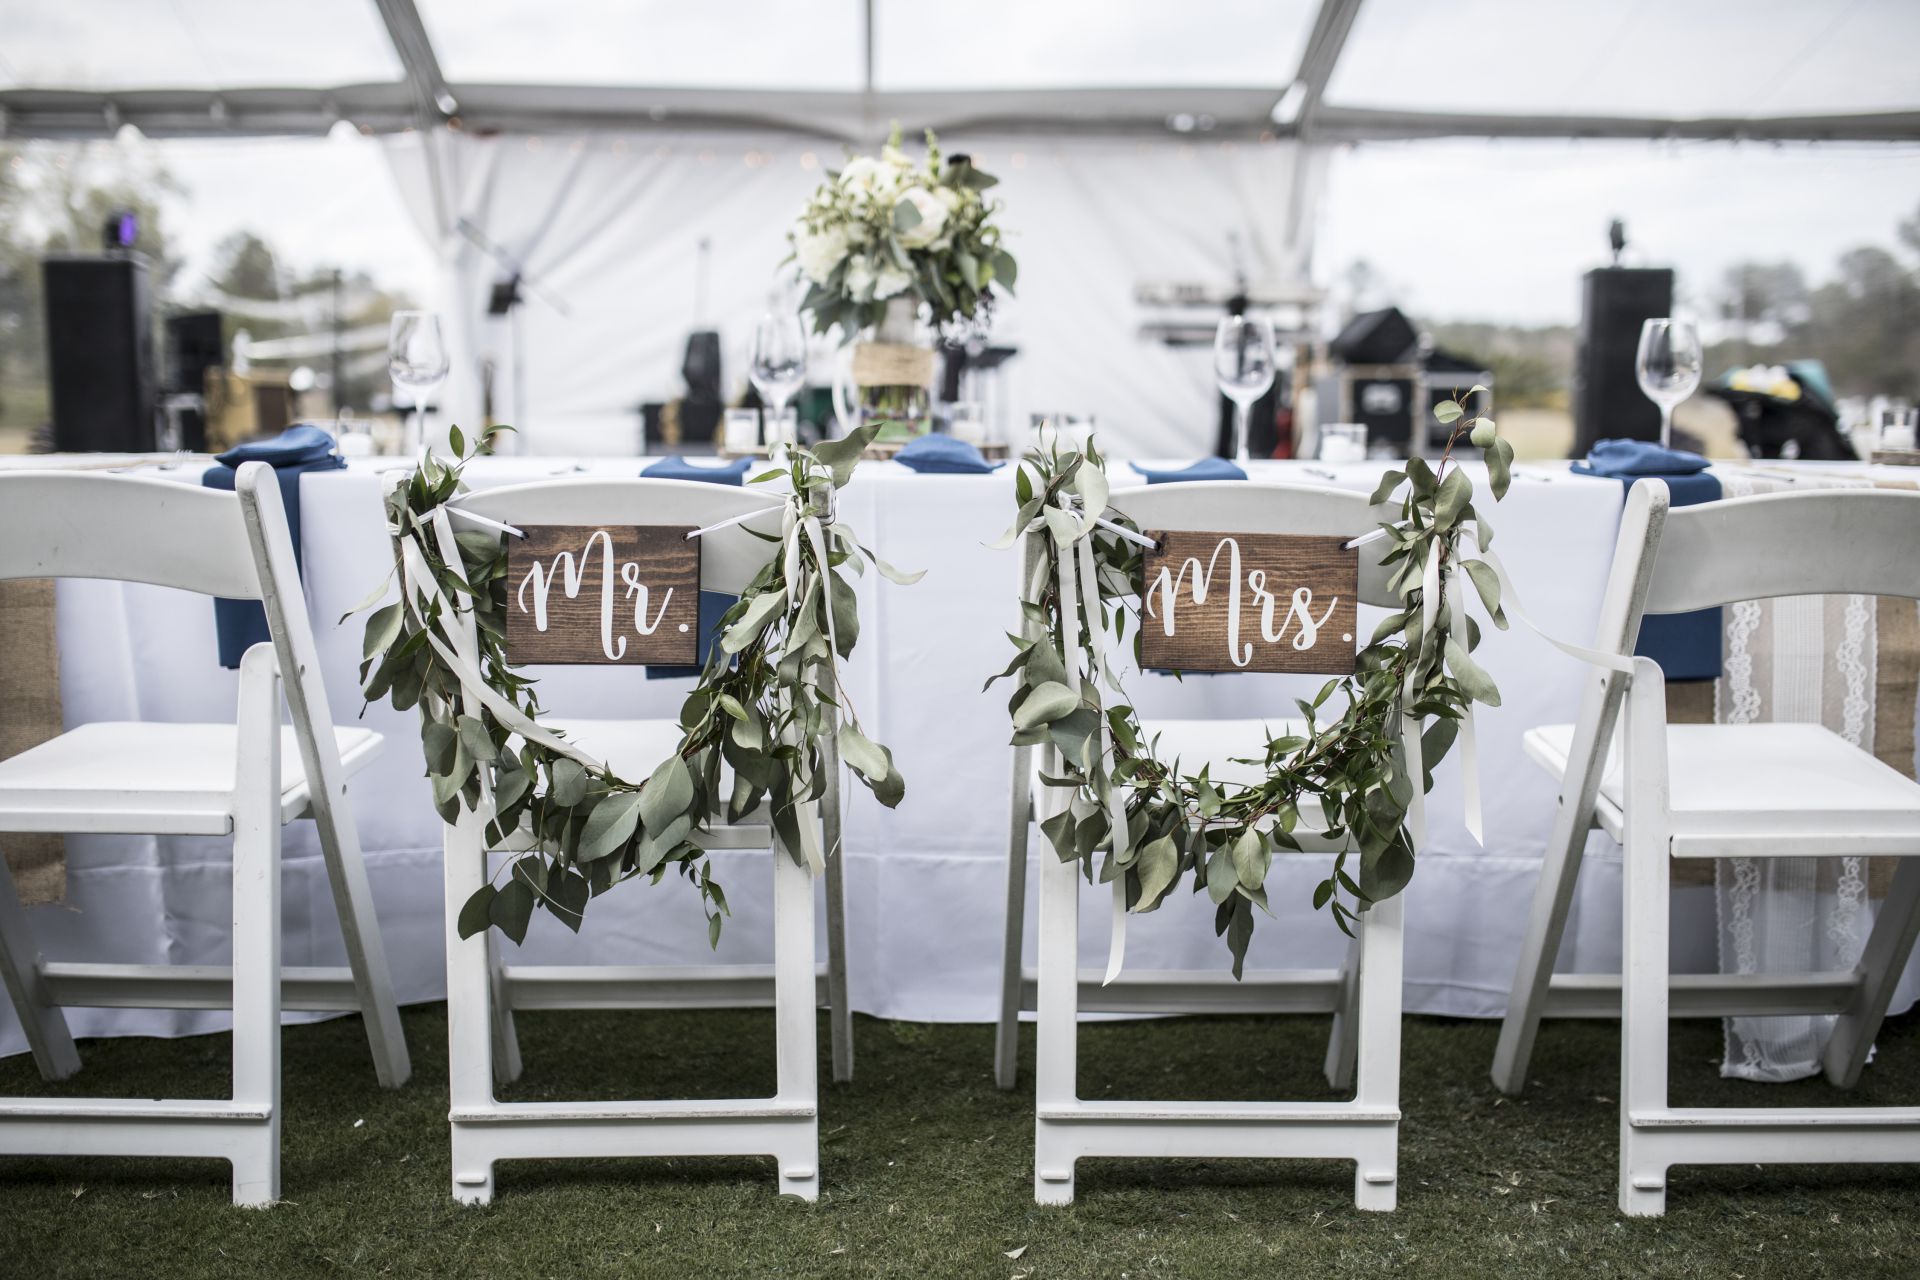 An image of a table at a reception with two decorated chairs